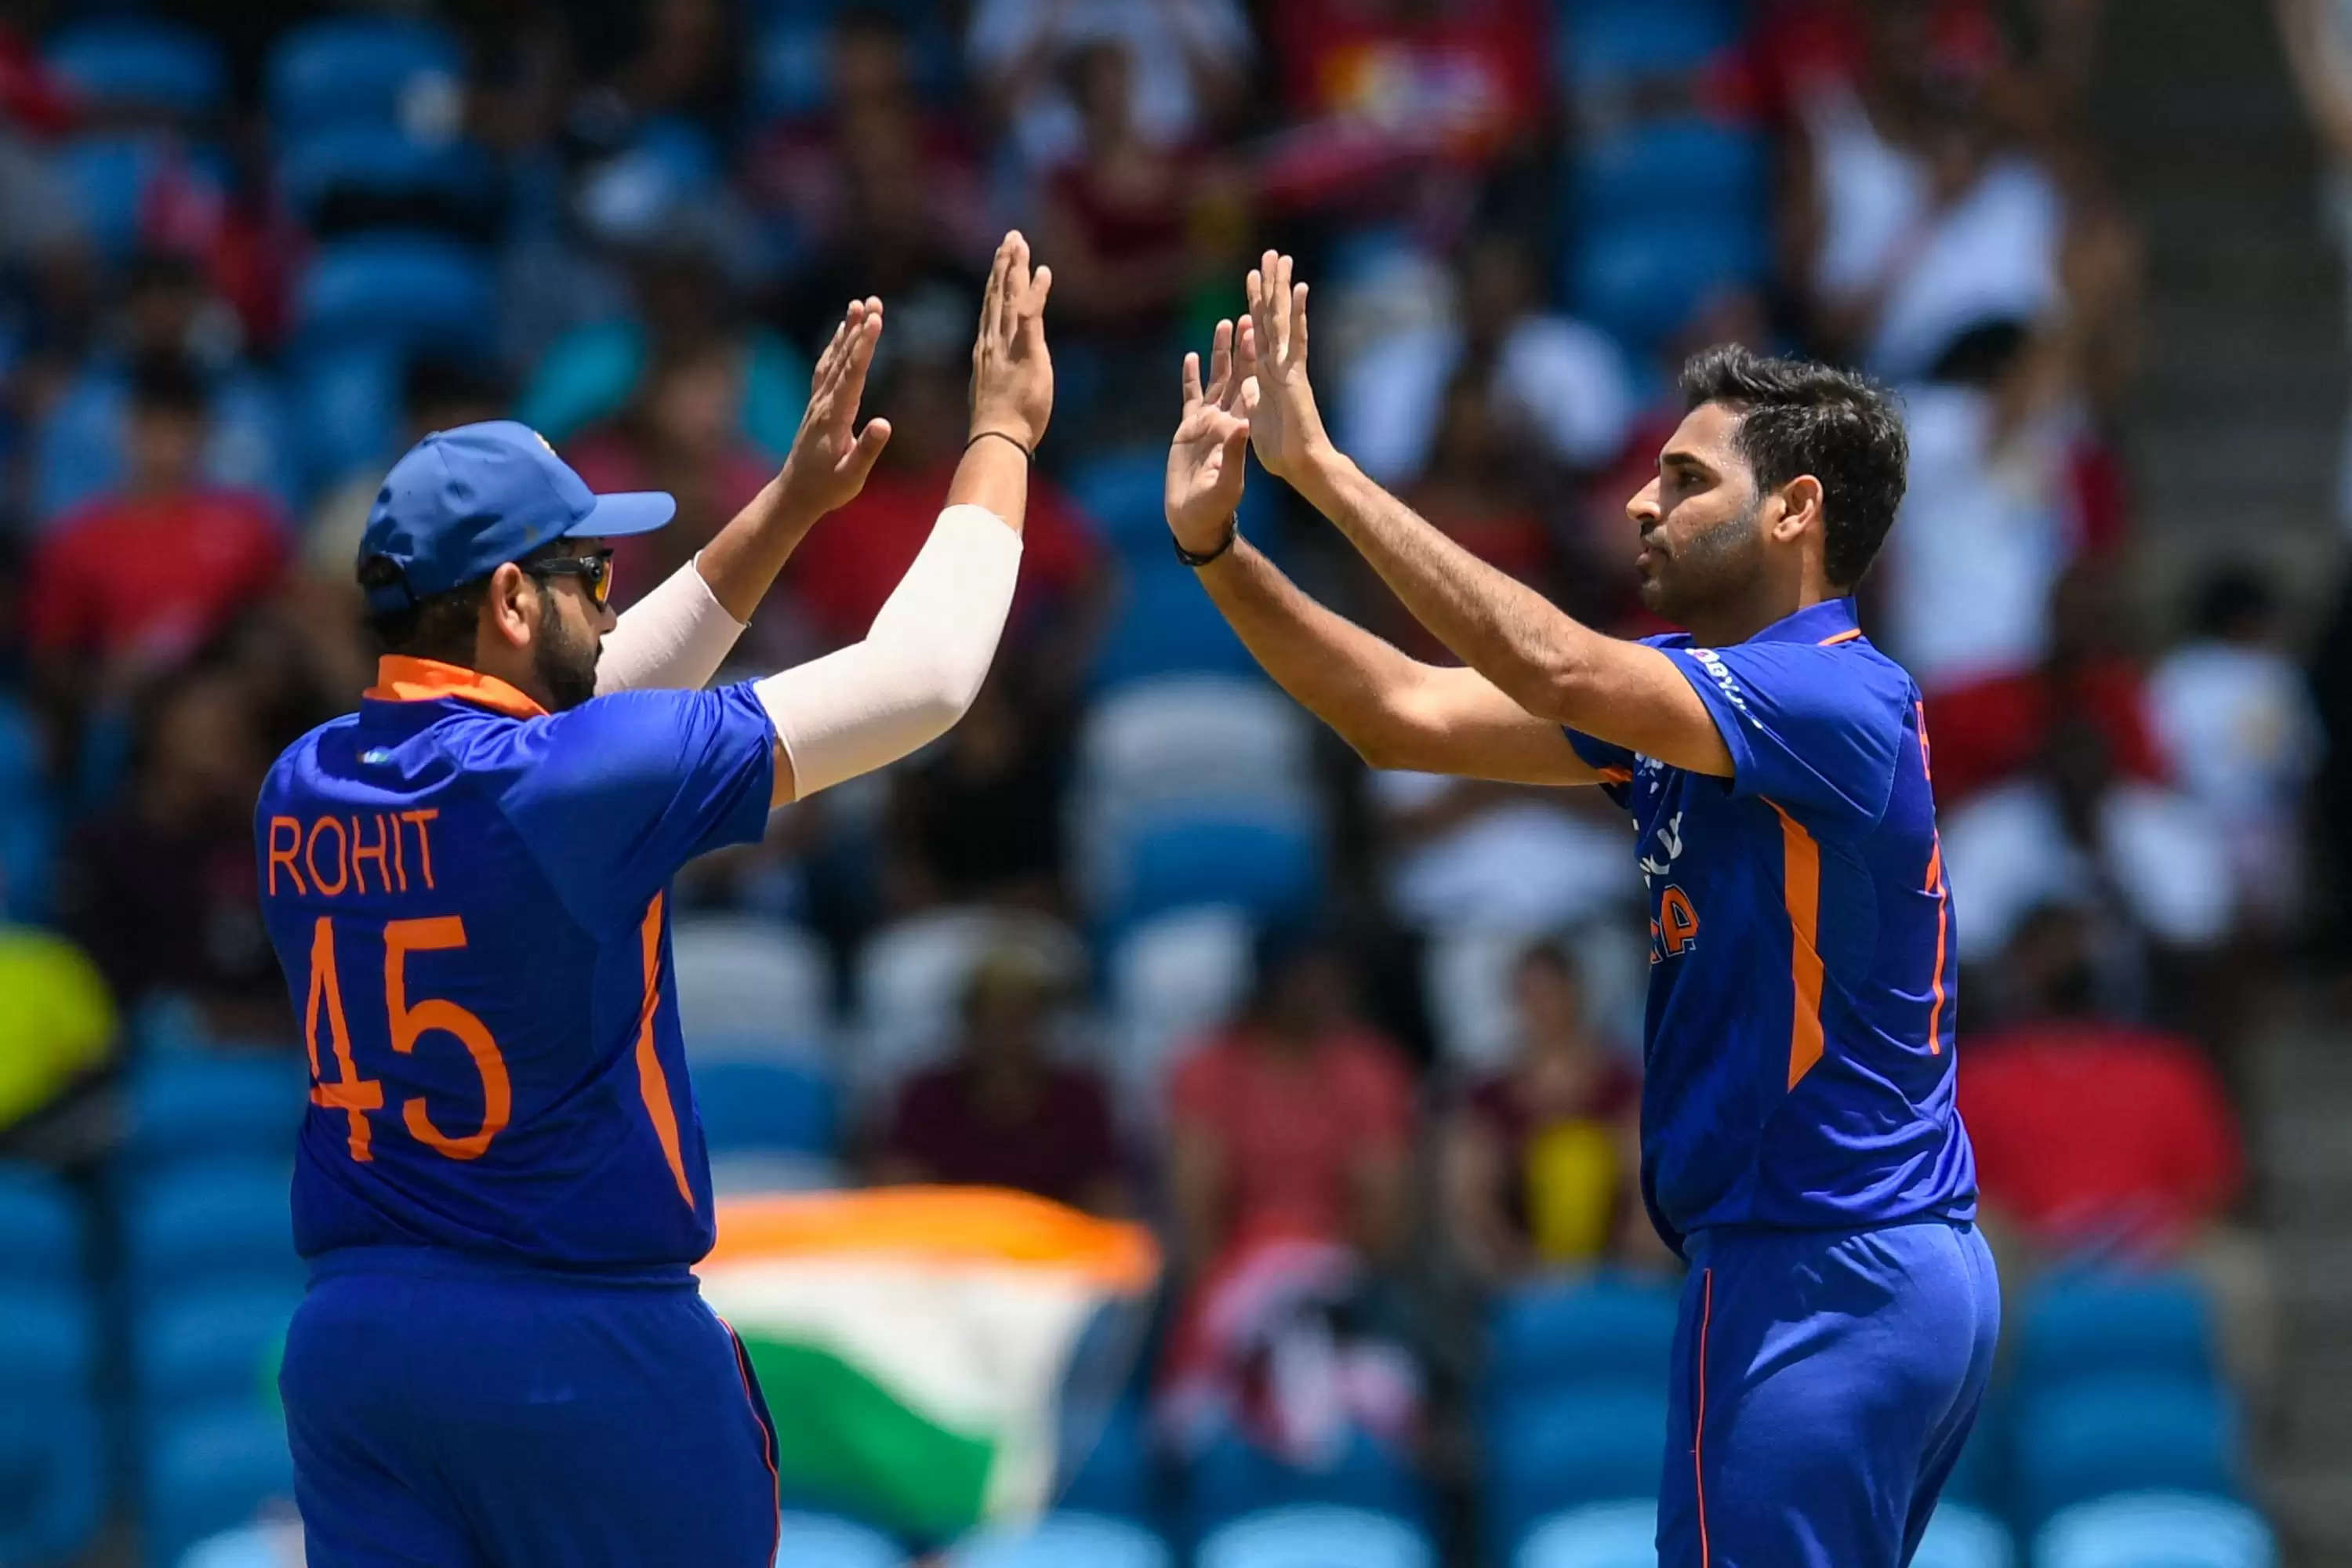 1st T20I India Vs West Indies: Indian team takes a 1-0 lead in the series